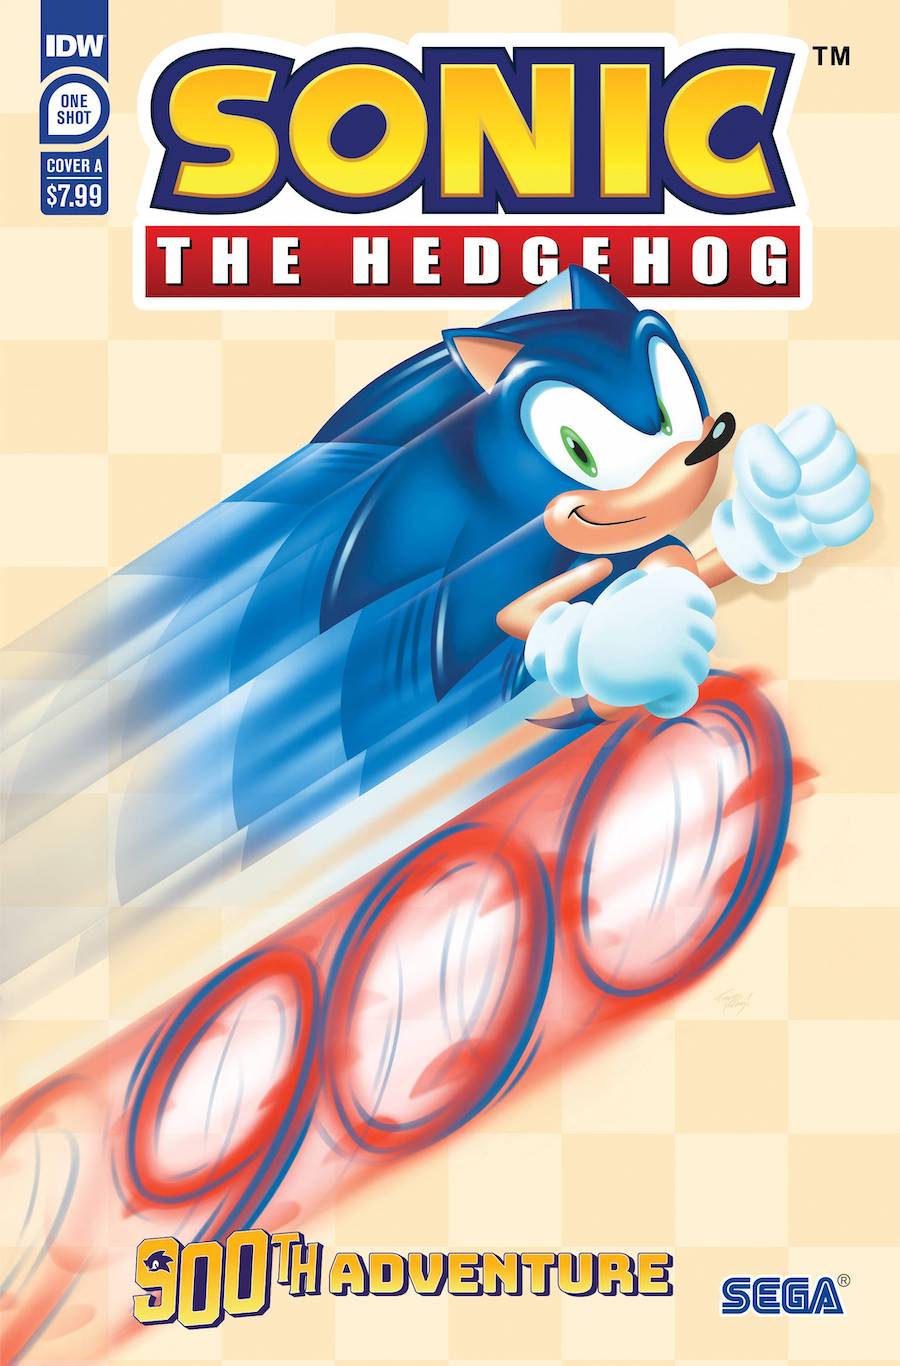 Cover of Sonic the Hedgehog 900th issue